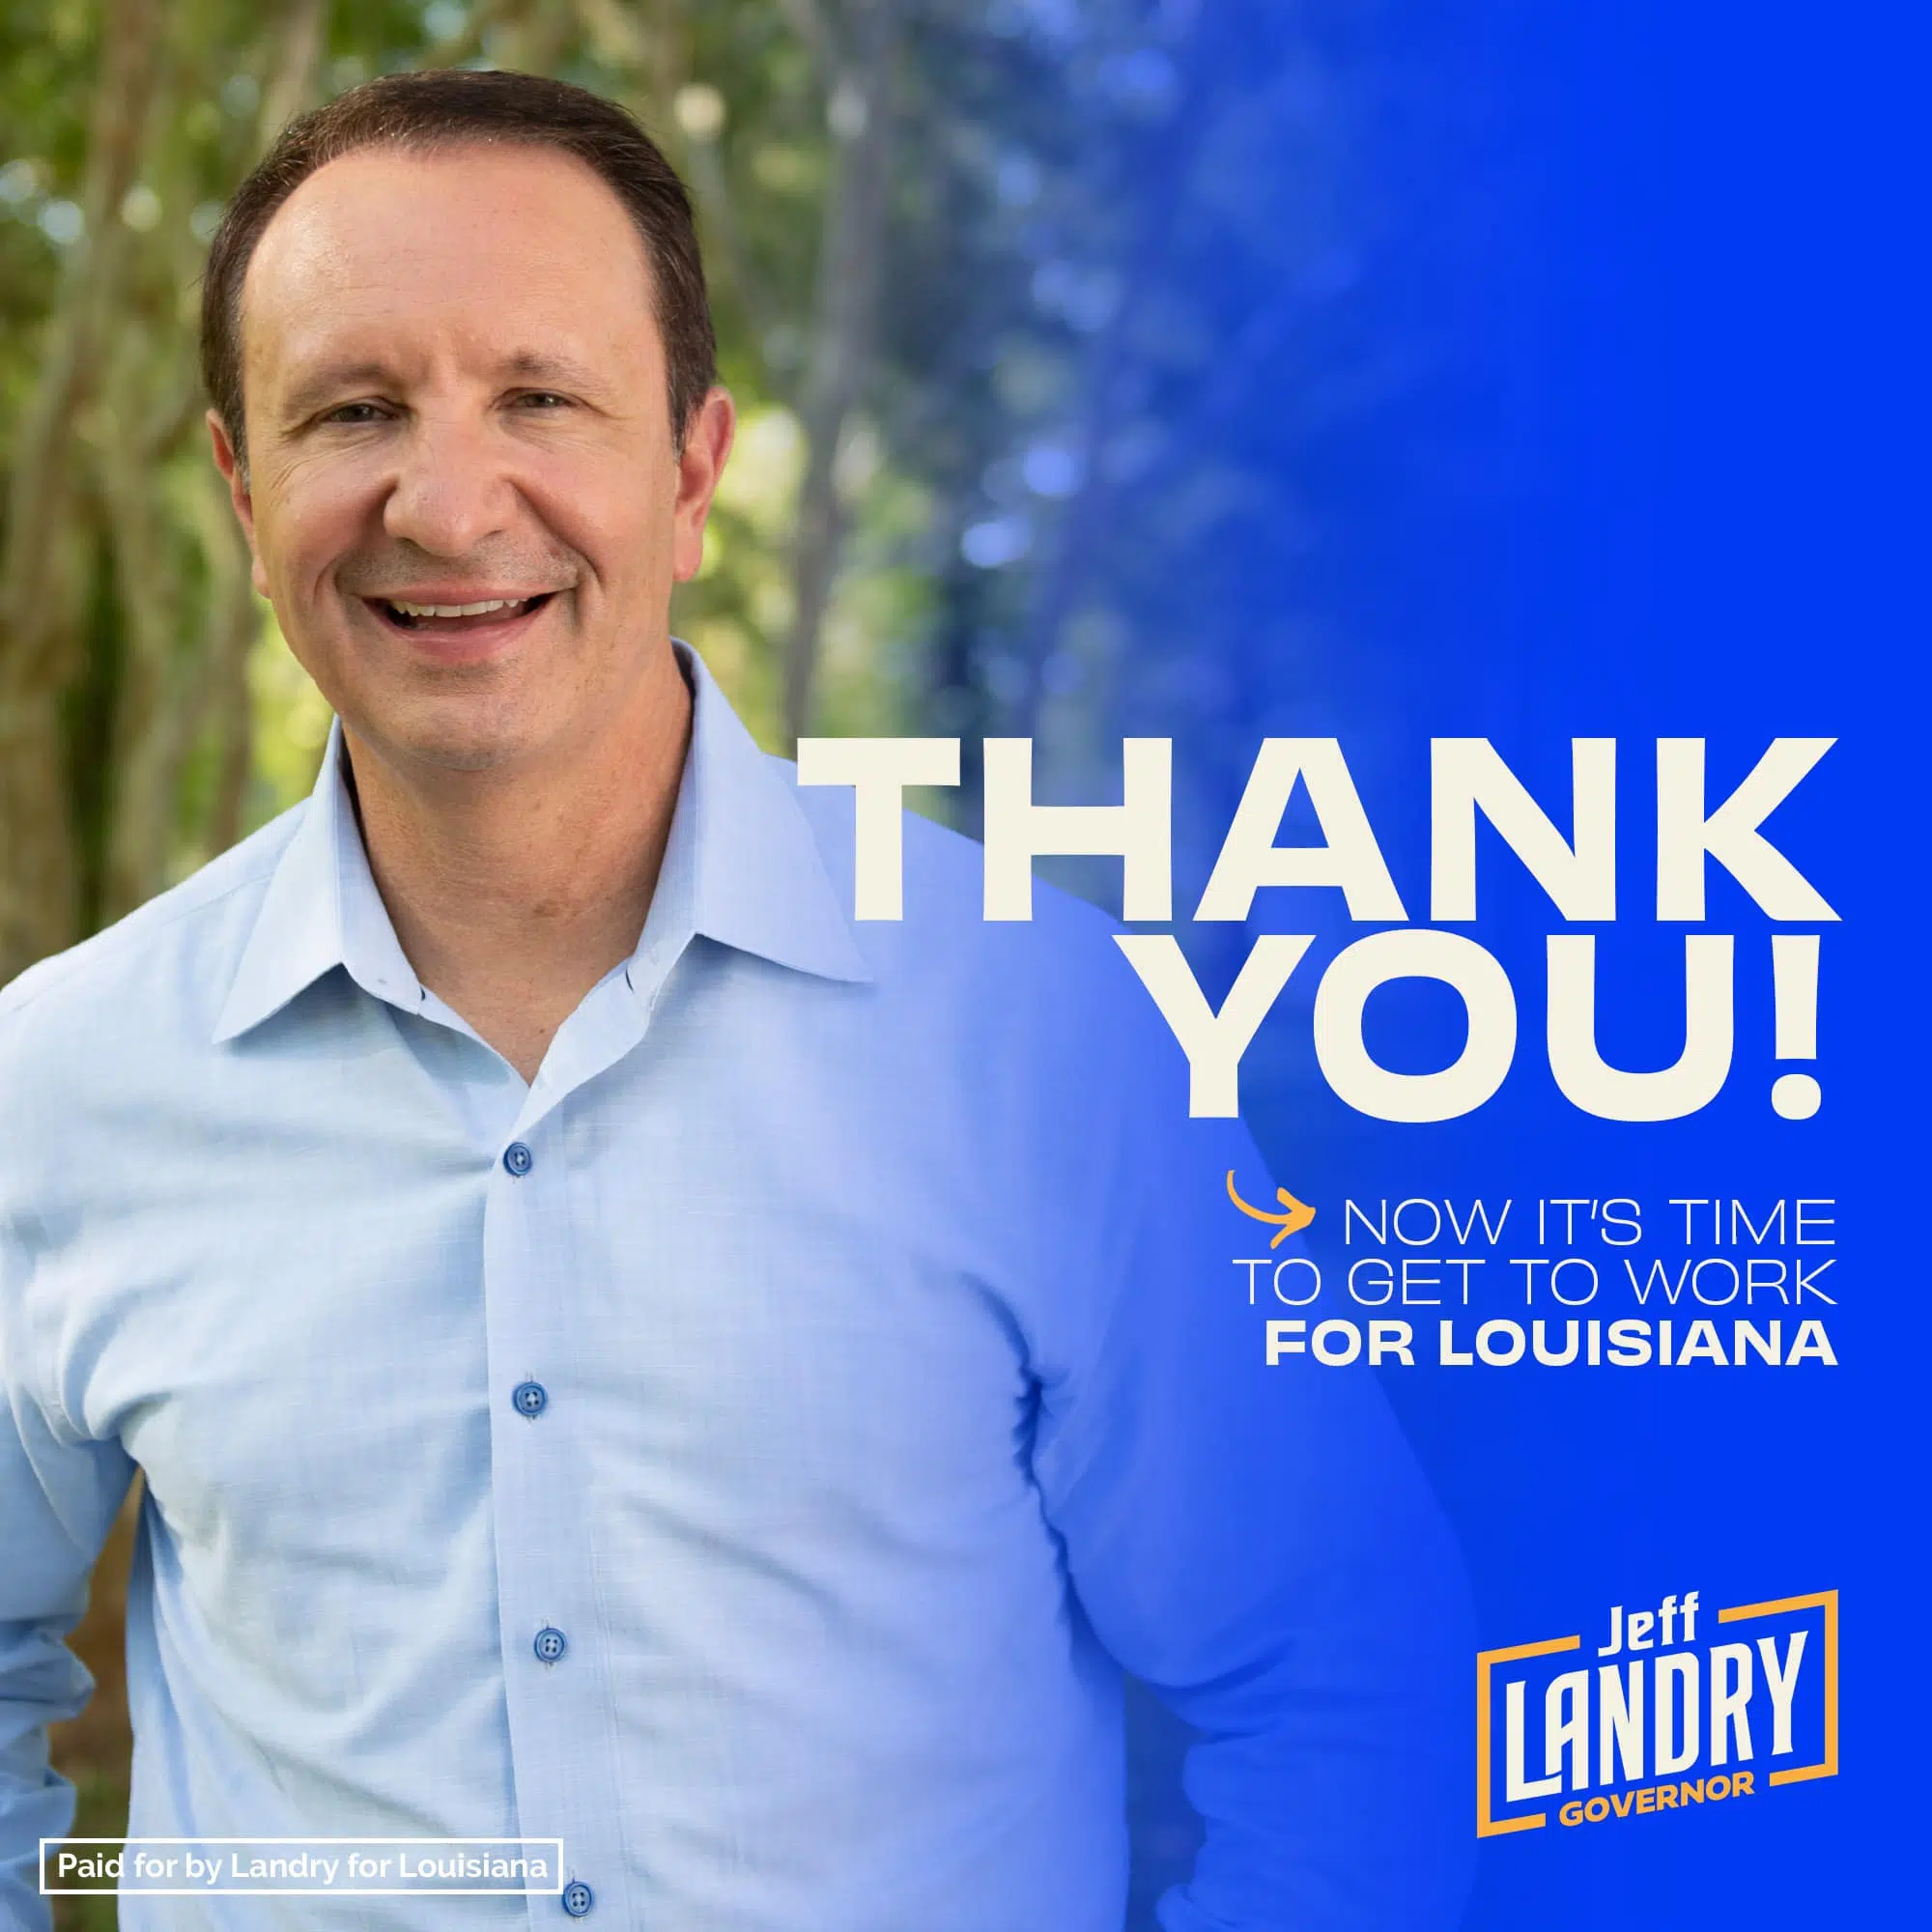 Historic election night as Jeff Landry becomes Governor-elect without the need for a runoff